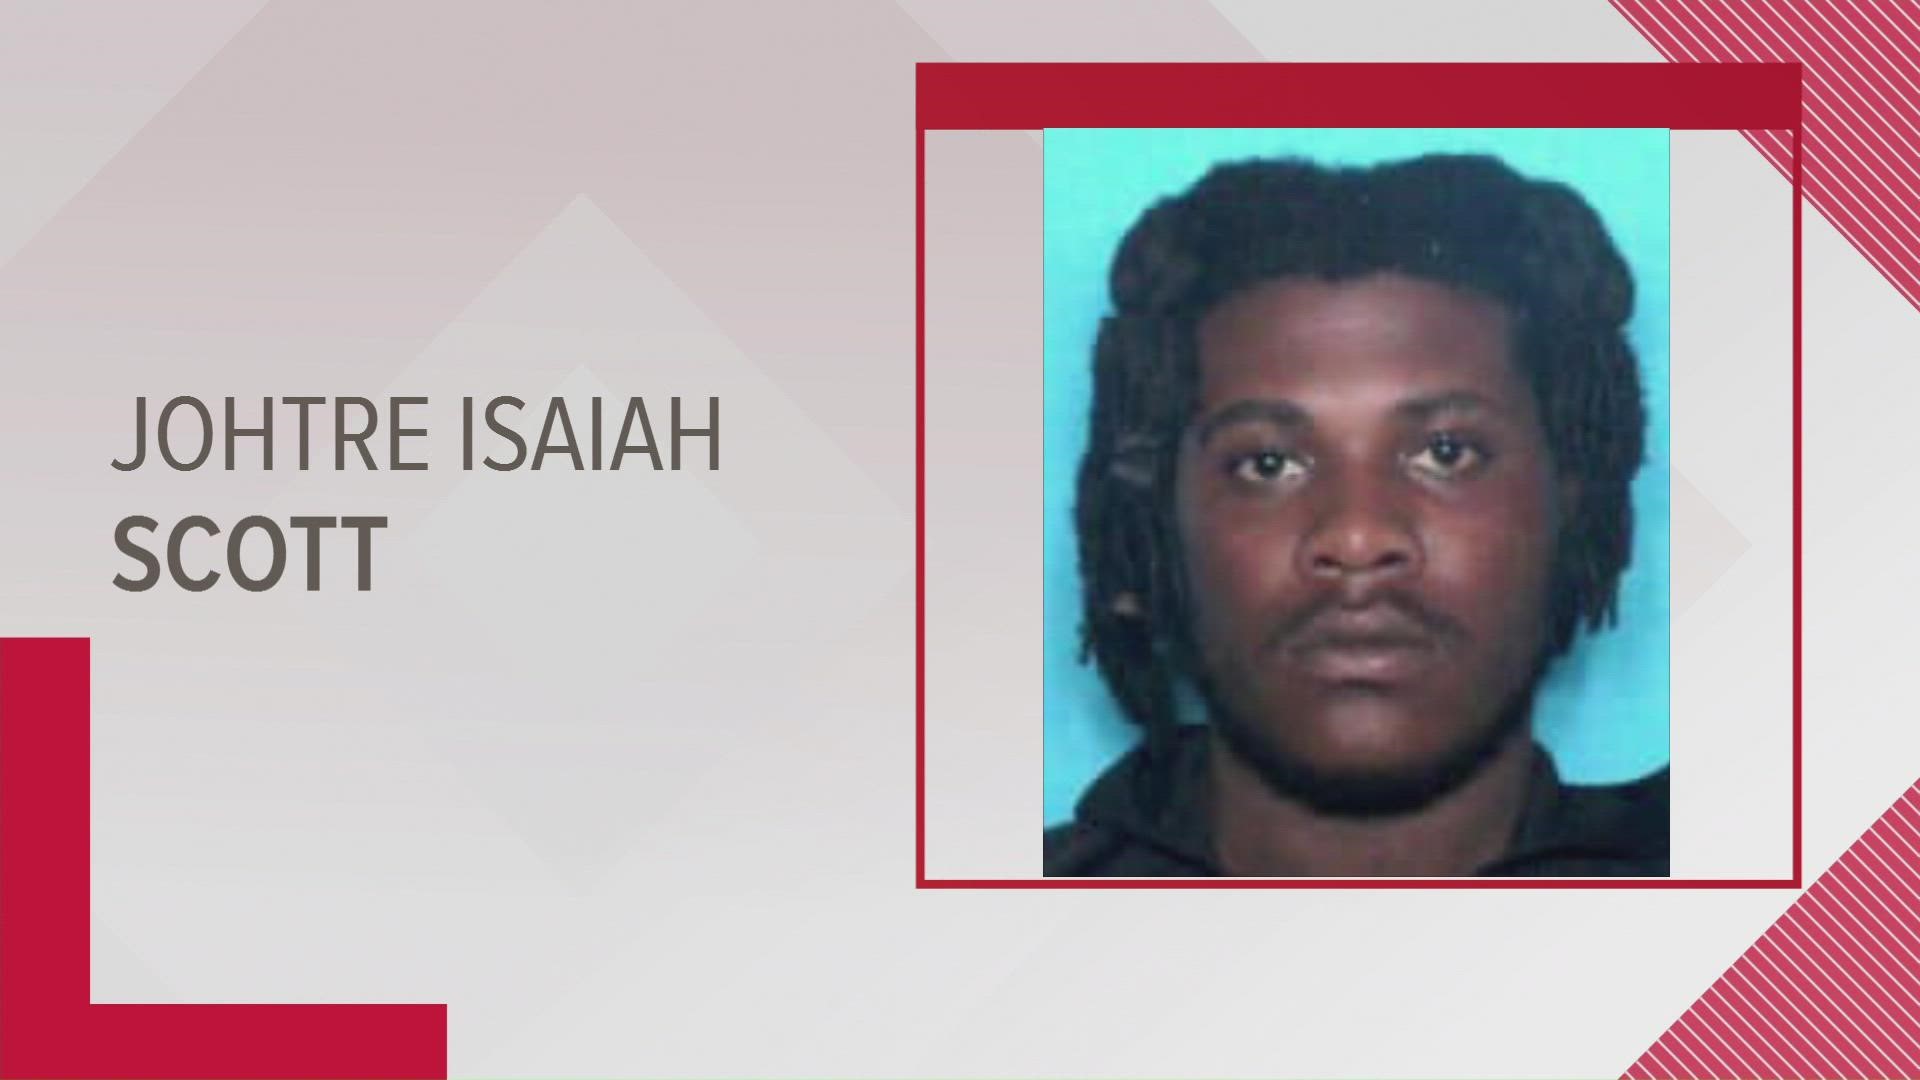 A suspect is wanted in a St. Charles Parish shooting that left one person dead and four others injured.